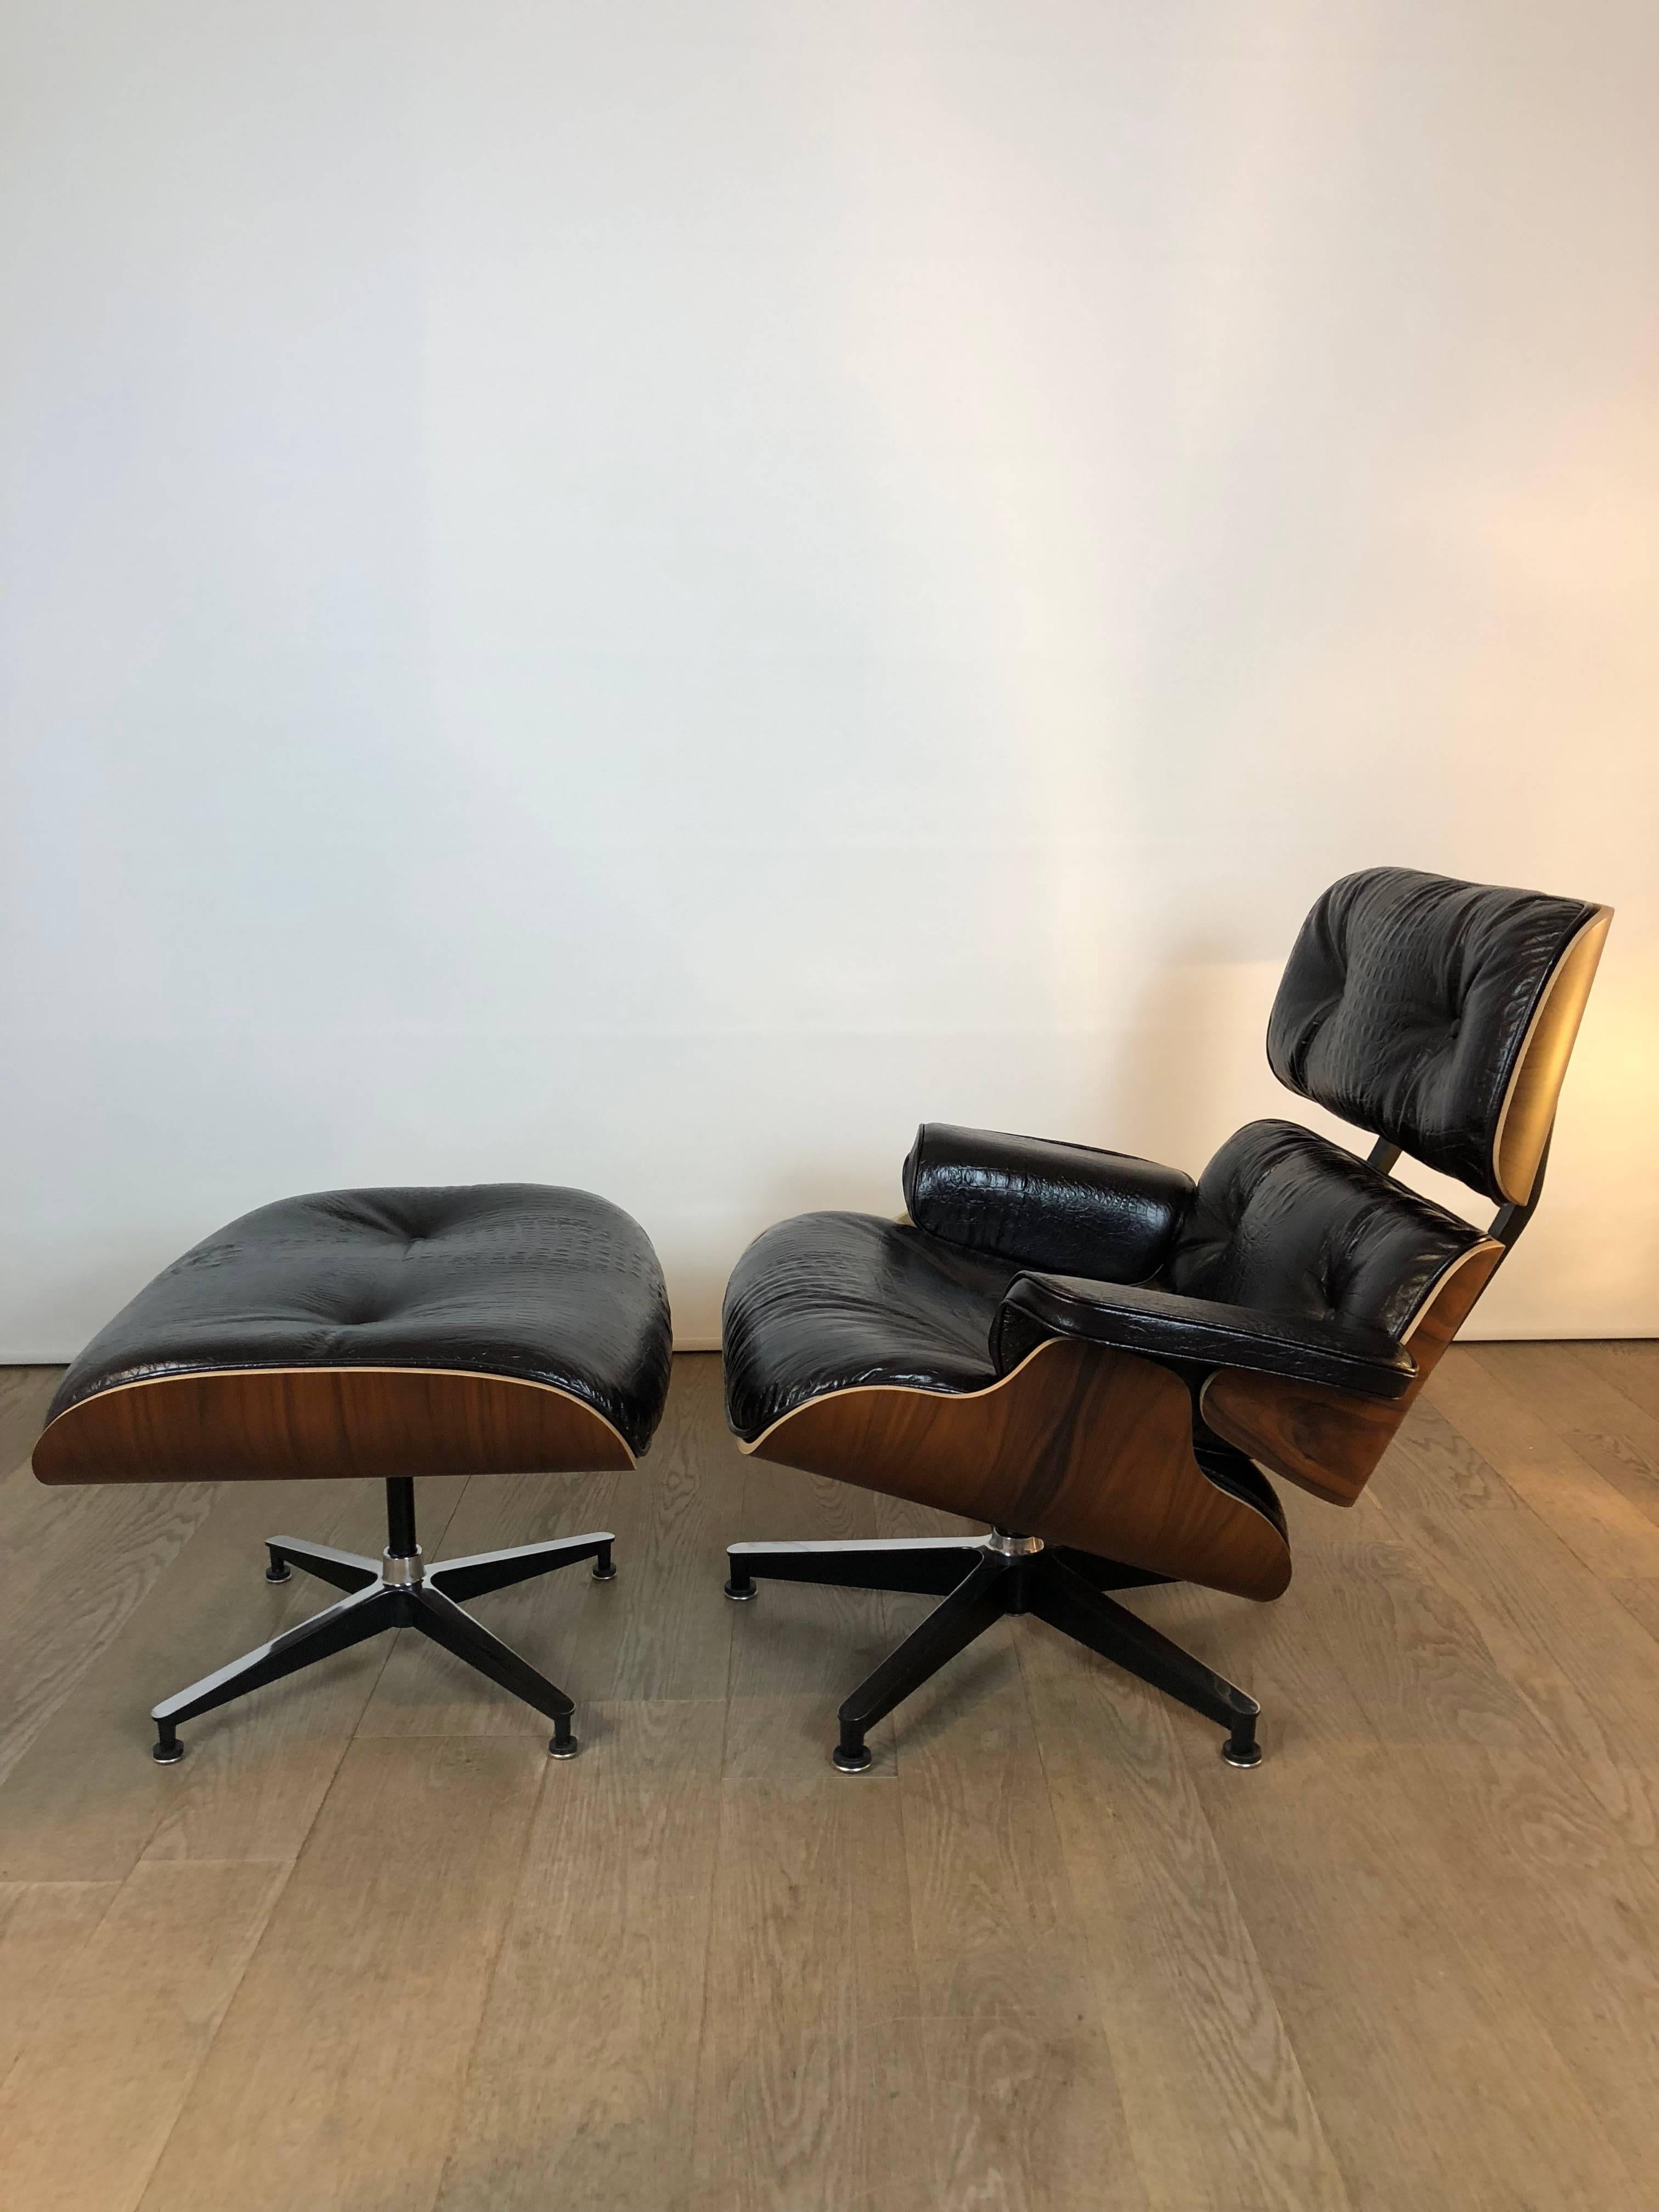 Iconic lounge chair with ottoman designed by Charles & Ray Eames, rosewood and dark brown crocodile print leather, Herman Miller edition, perfect conditions.